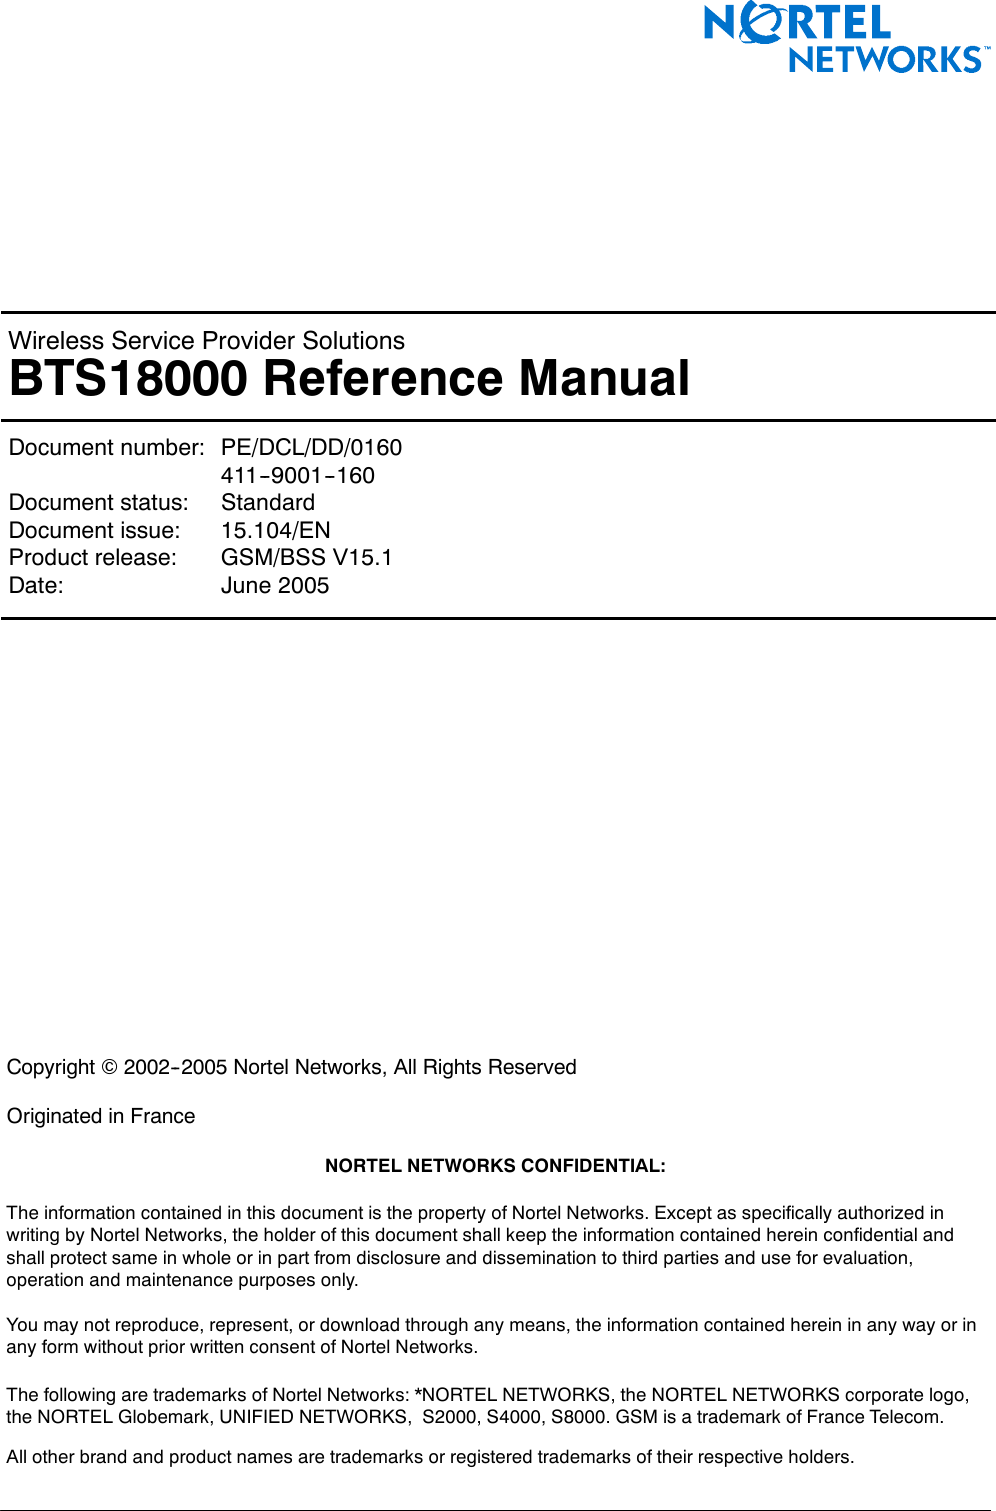 &lt; 142 &gt; : BTS18000 Reference ManualWireless Service Provider SolutionsBTS18000 Reference ManualDocument number: PE/DCL/DD/0160411--9001--160Document status: StandardDocument issue: 15.104/ENProduct release: GSM/BSS V15.1Date: June 2005Copyright ©2002--2005 Nortel Networks, All Rights ReservedOriginated in FranceNORTEL NETWORKS CONFIDENTIAL:The information contained in this document is the property of Nortel Networks. Except as specifically authorized inwriting by Nortel Networks, the holder of this document shall keep the information contained herein confidential andshall protect same in whole or in part from disclosure and dissemination to third parties and use for evaluation,operation and maintenance purposes only.You may not reproduce, represent, or download through any means, the information contained herein in any way or inany form without prior written consent of Nortel Networks.The following are trademarks of Nortel Networks: *NORTEL NETWORKS, the NORTEL NETWORKS corporate logo,the NORTEL Globemark, UNIFIED NETWORKS, S2000, S4000, S8000. GSM is a trademark of France Telecom.All other brand and product names are trademarks or registered trademarks of their respective holders.